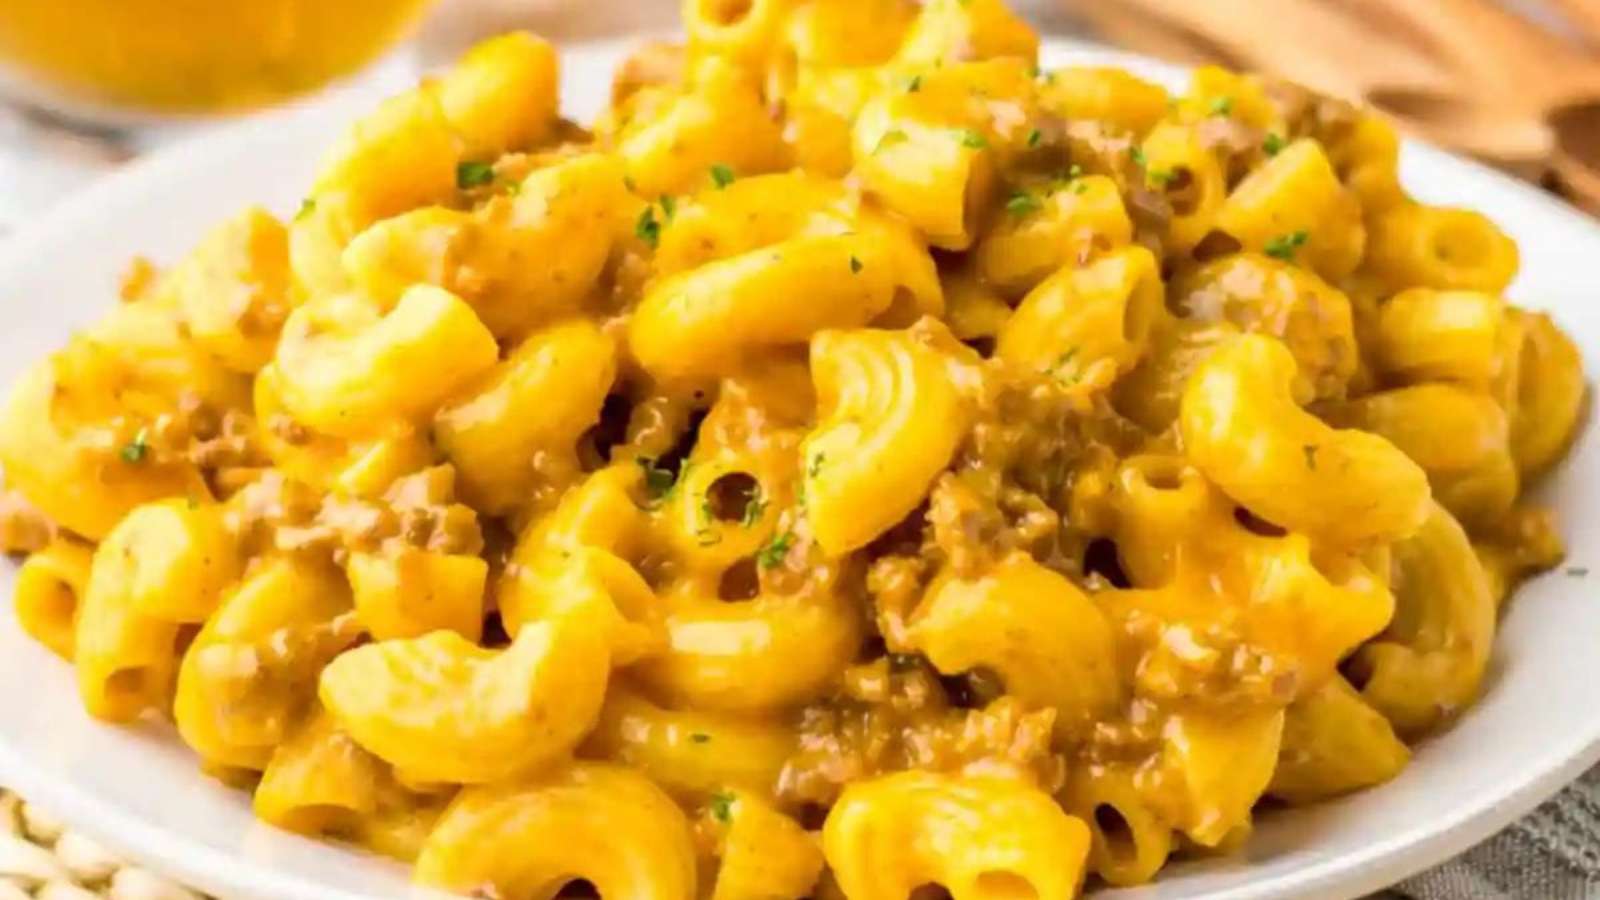 A plate of macaroni and cheese on a table.